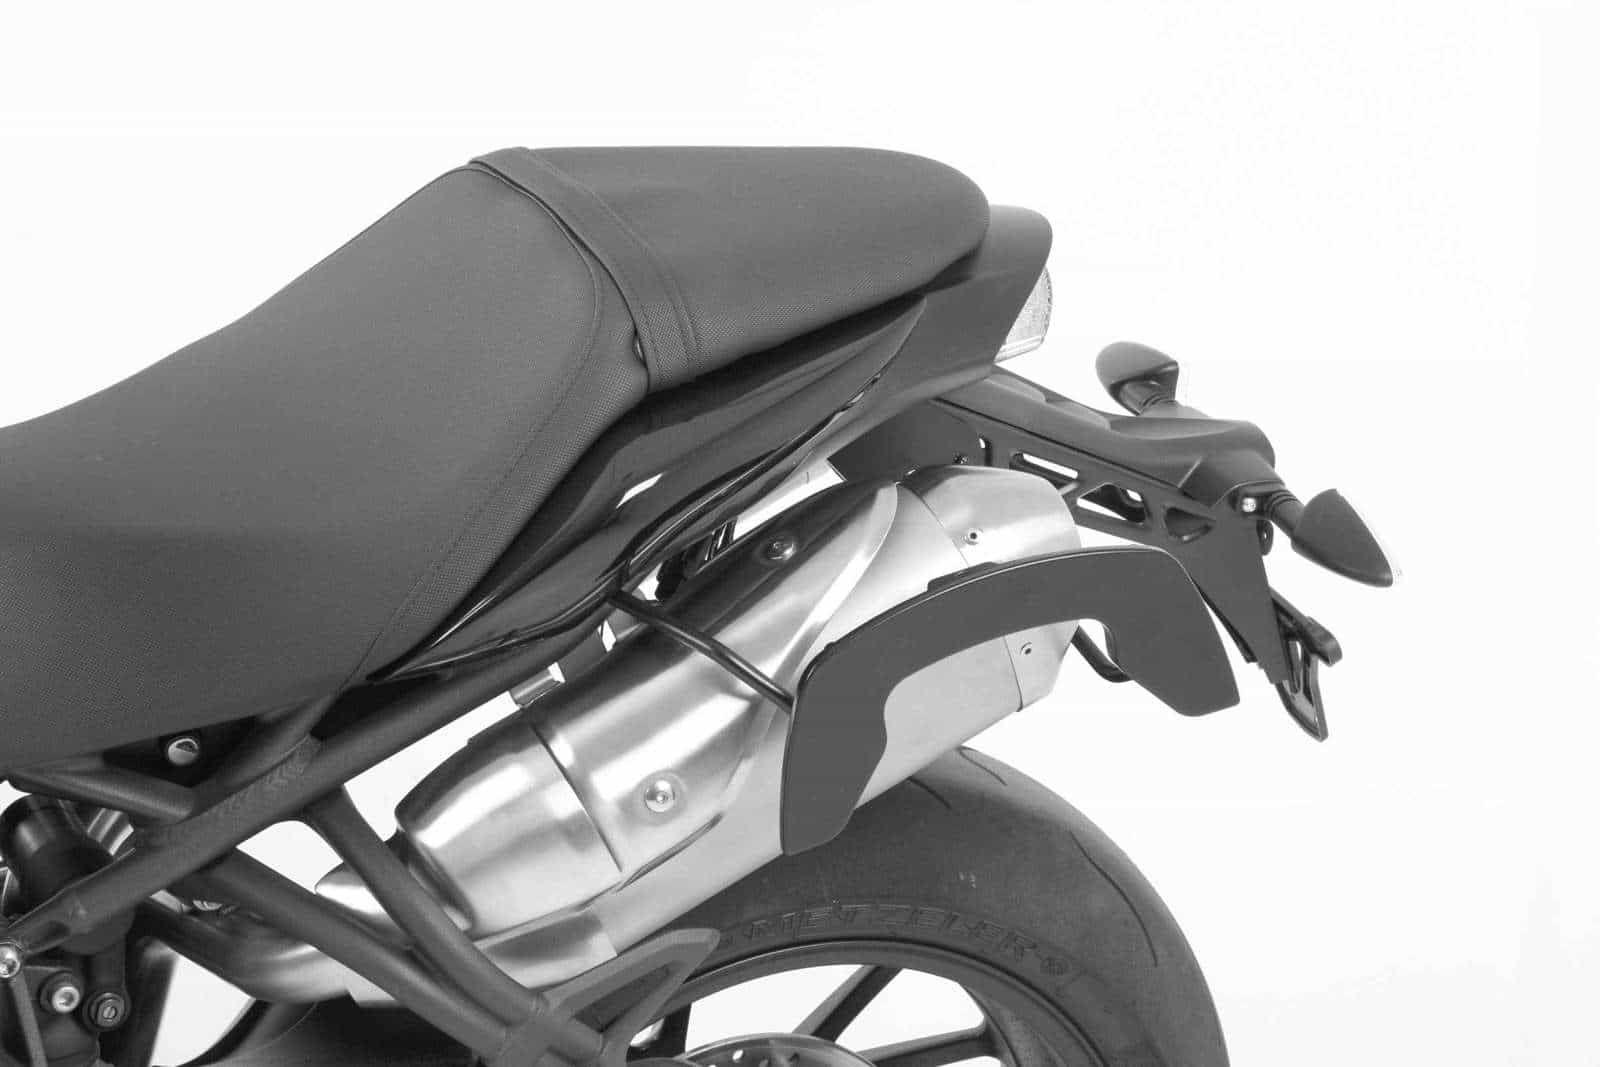 C-Bow sidecarrier for Triumph Speed Triple 1050 (2011-2015)